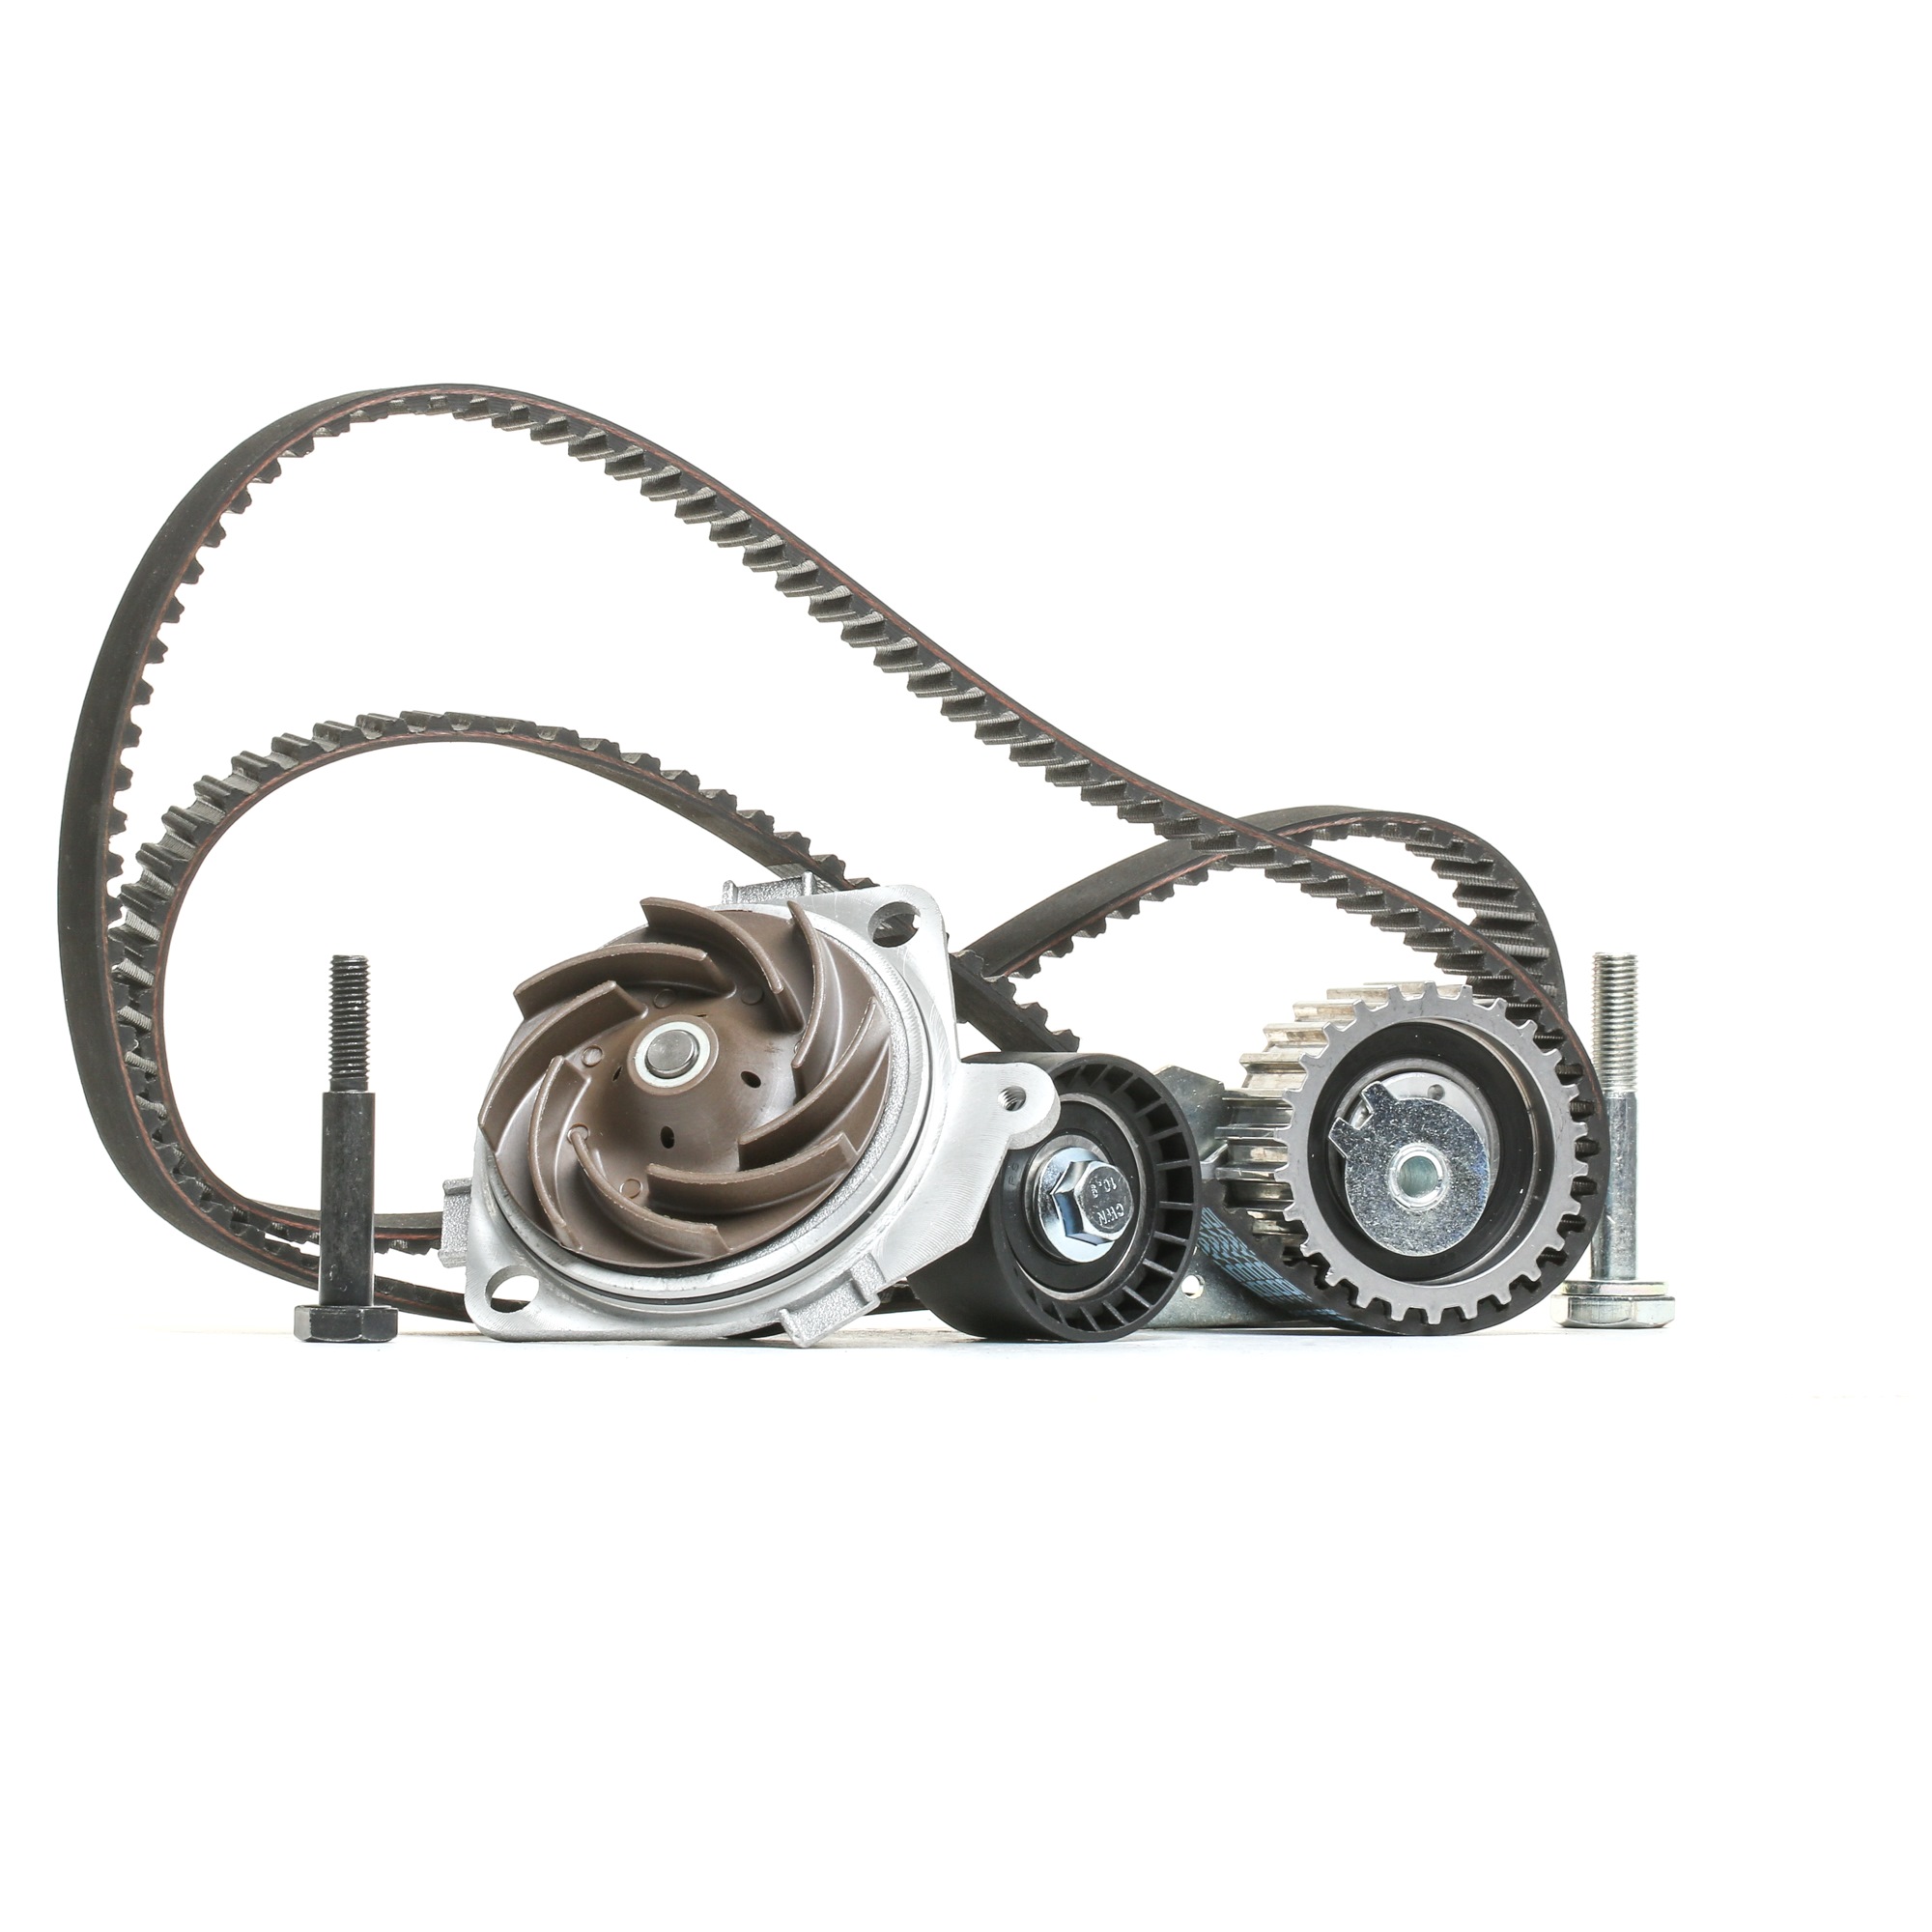 DOLZ KD032 Water pump and timing belt kit Number of Teeth: 190, Width: 24,0 mm